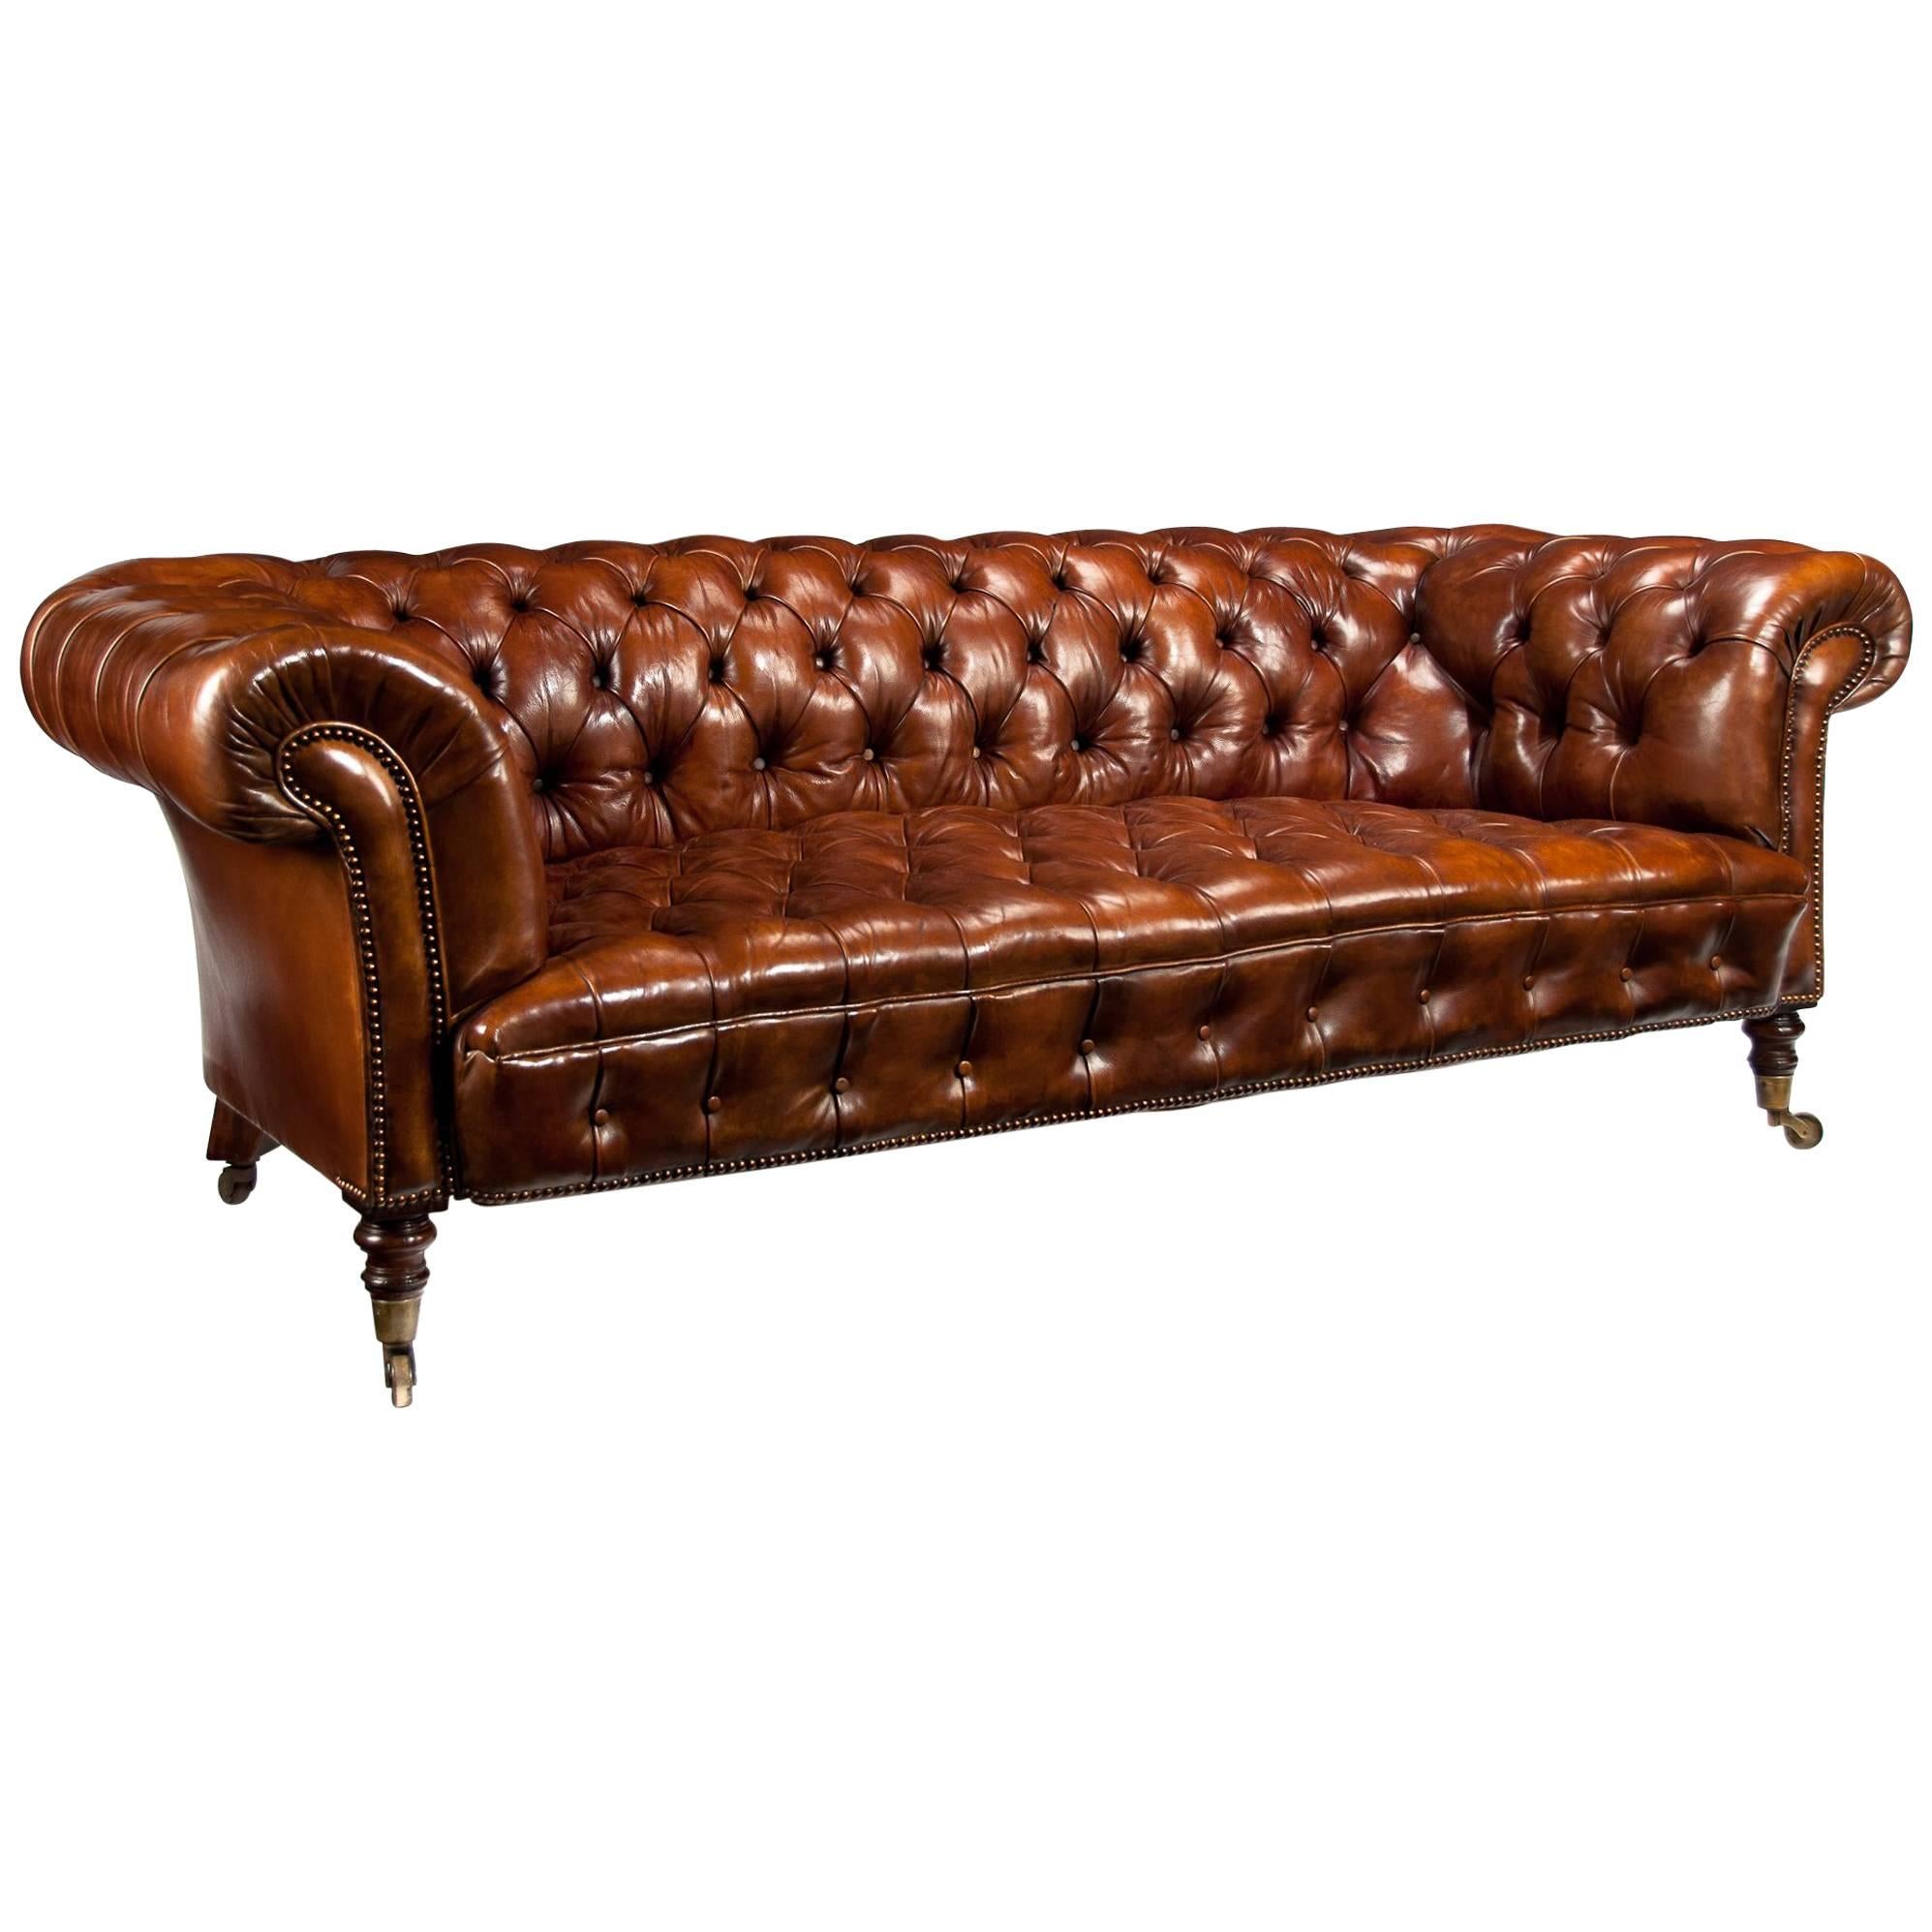 Fine Antique 19th Century Leather Upholstered Chesterfield